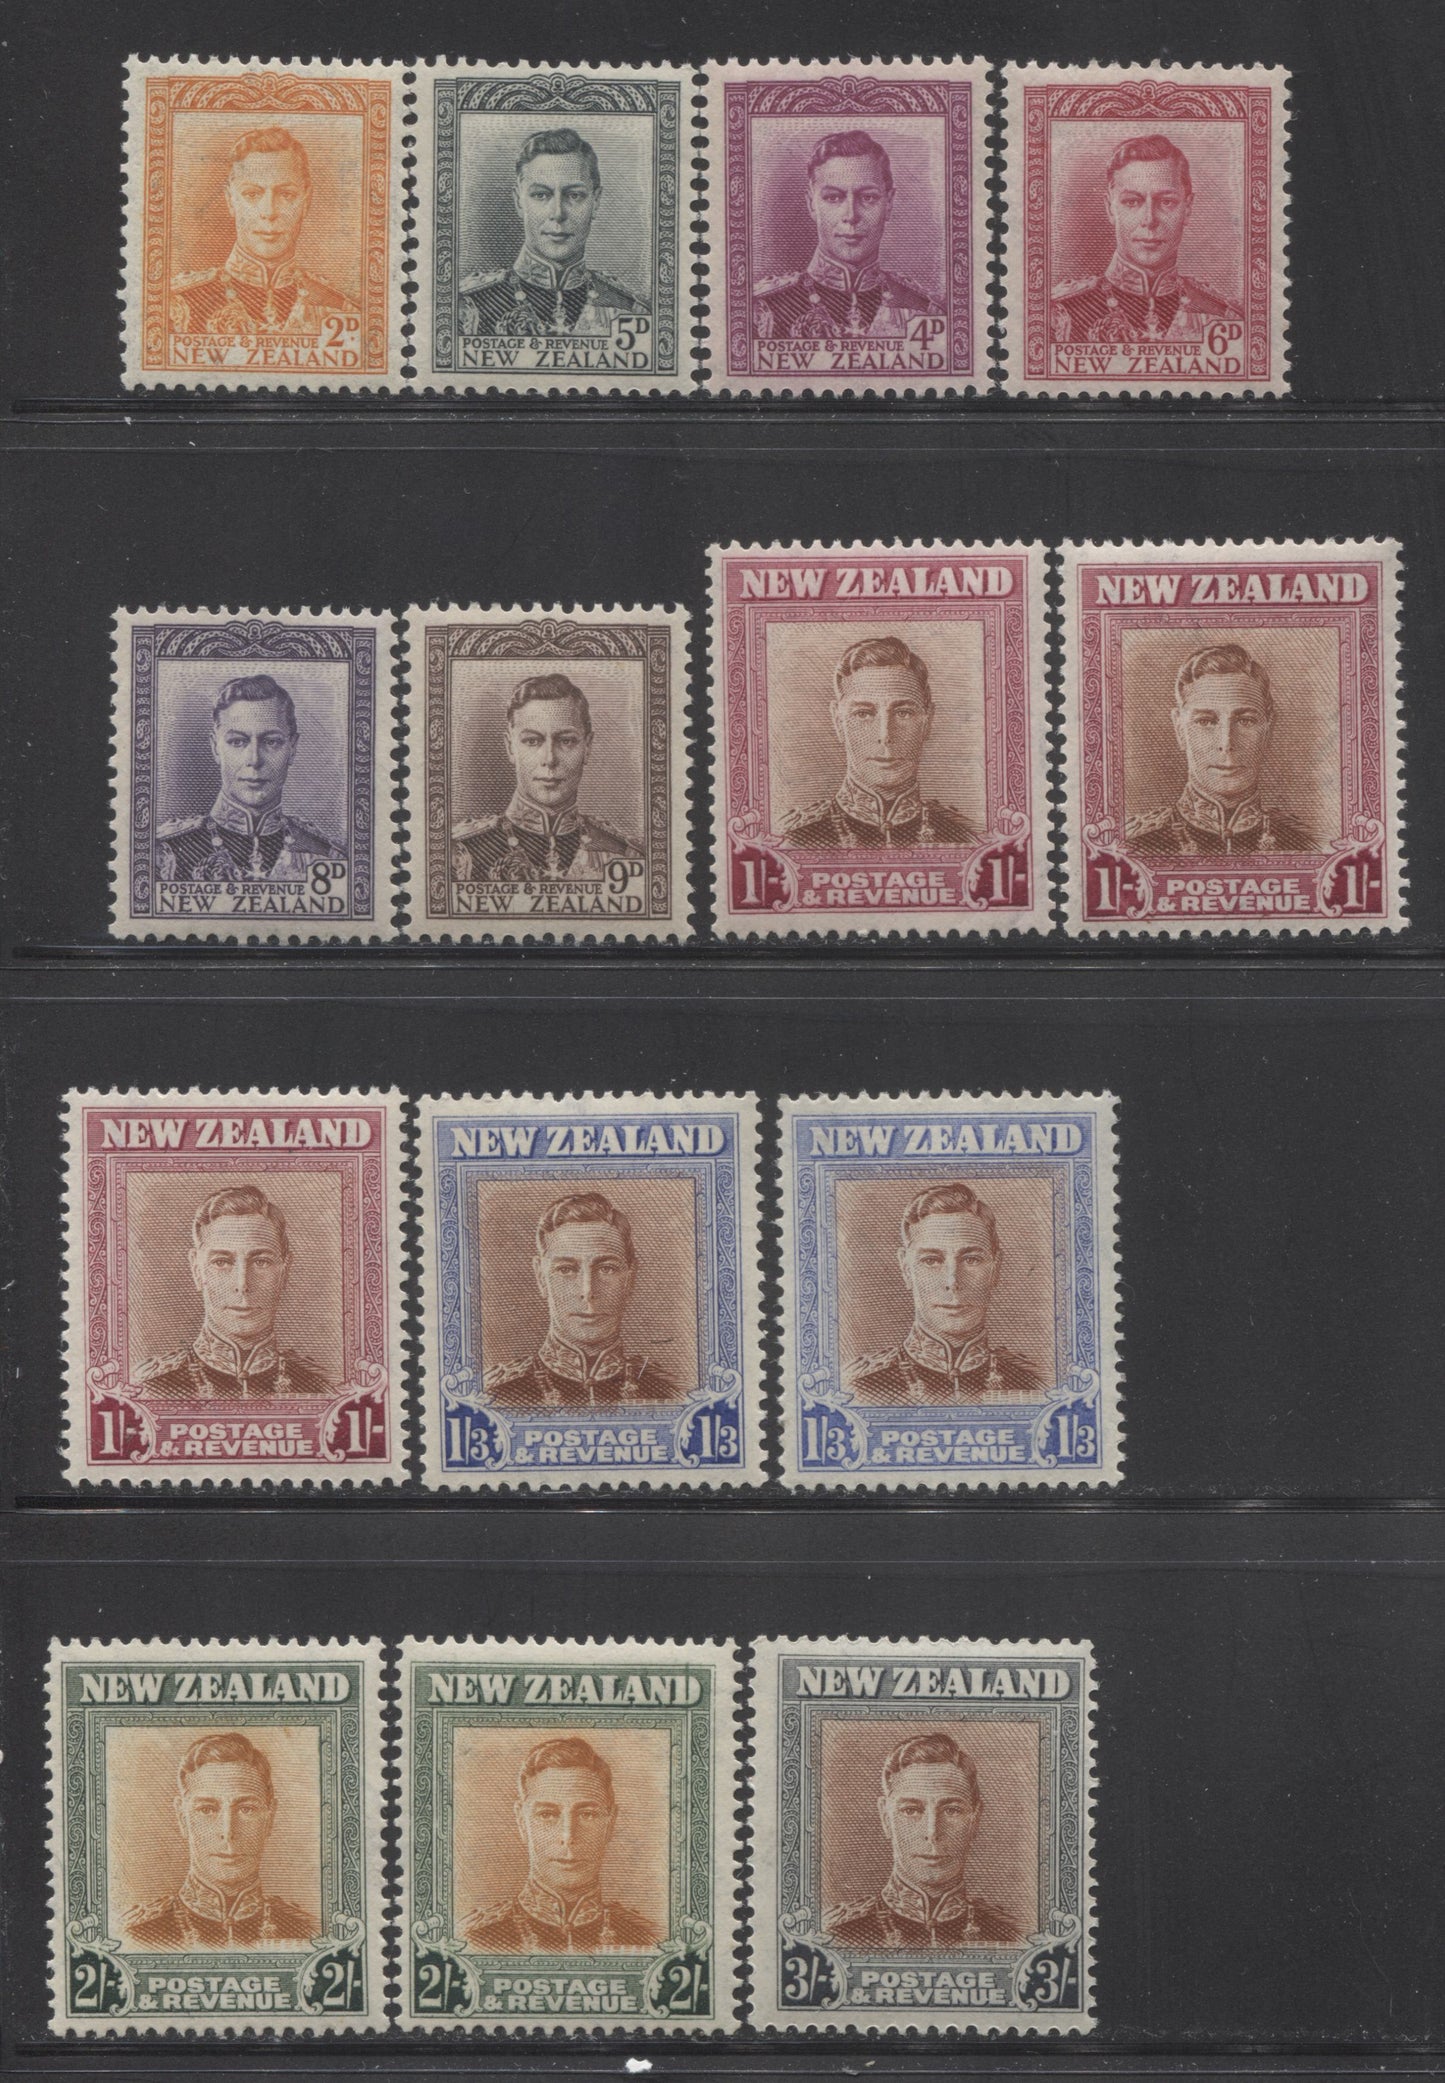 Lot 86 New Zealand SG#680-689 1947-52 KGVI Pictorial Issue, A Complete VFNH Set Ranging From 2d to 3s Plus Plate and Watermark Varieties. Mult NZ + Star Wmk, Various Perfs, SG. Cat. 40.20 GBP = $69.14